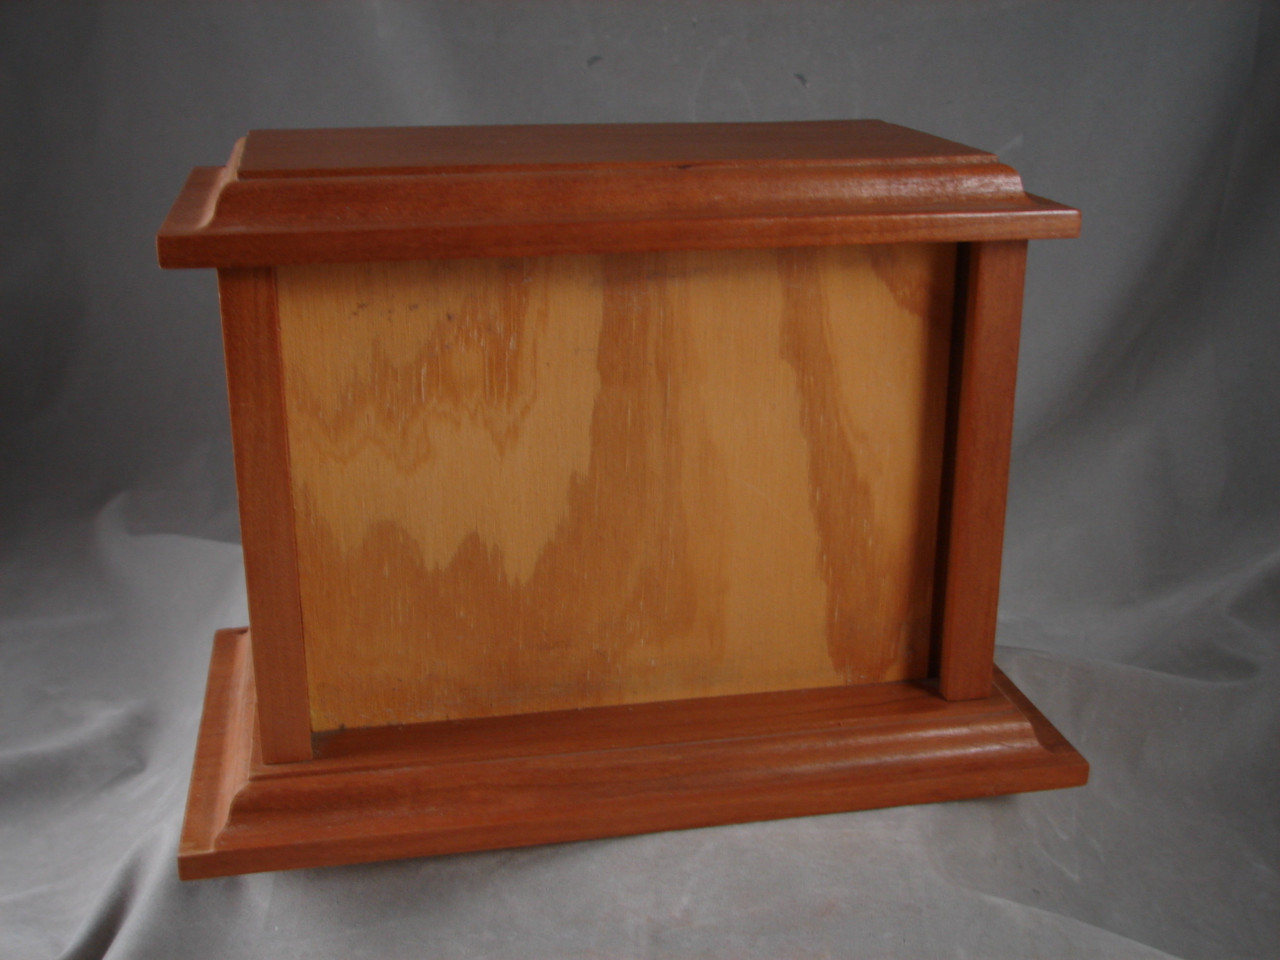 Front Side of Cherry Urn without engravable
insert